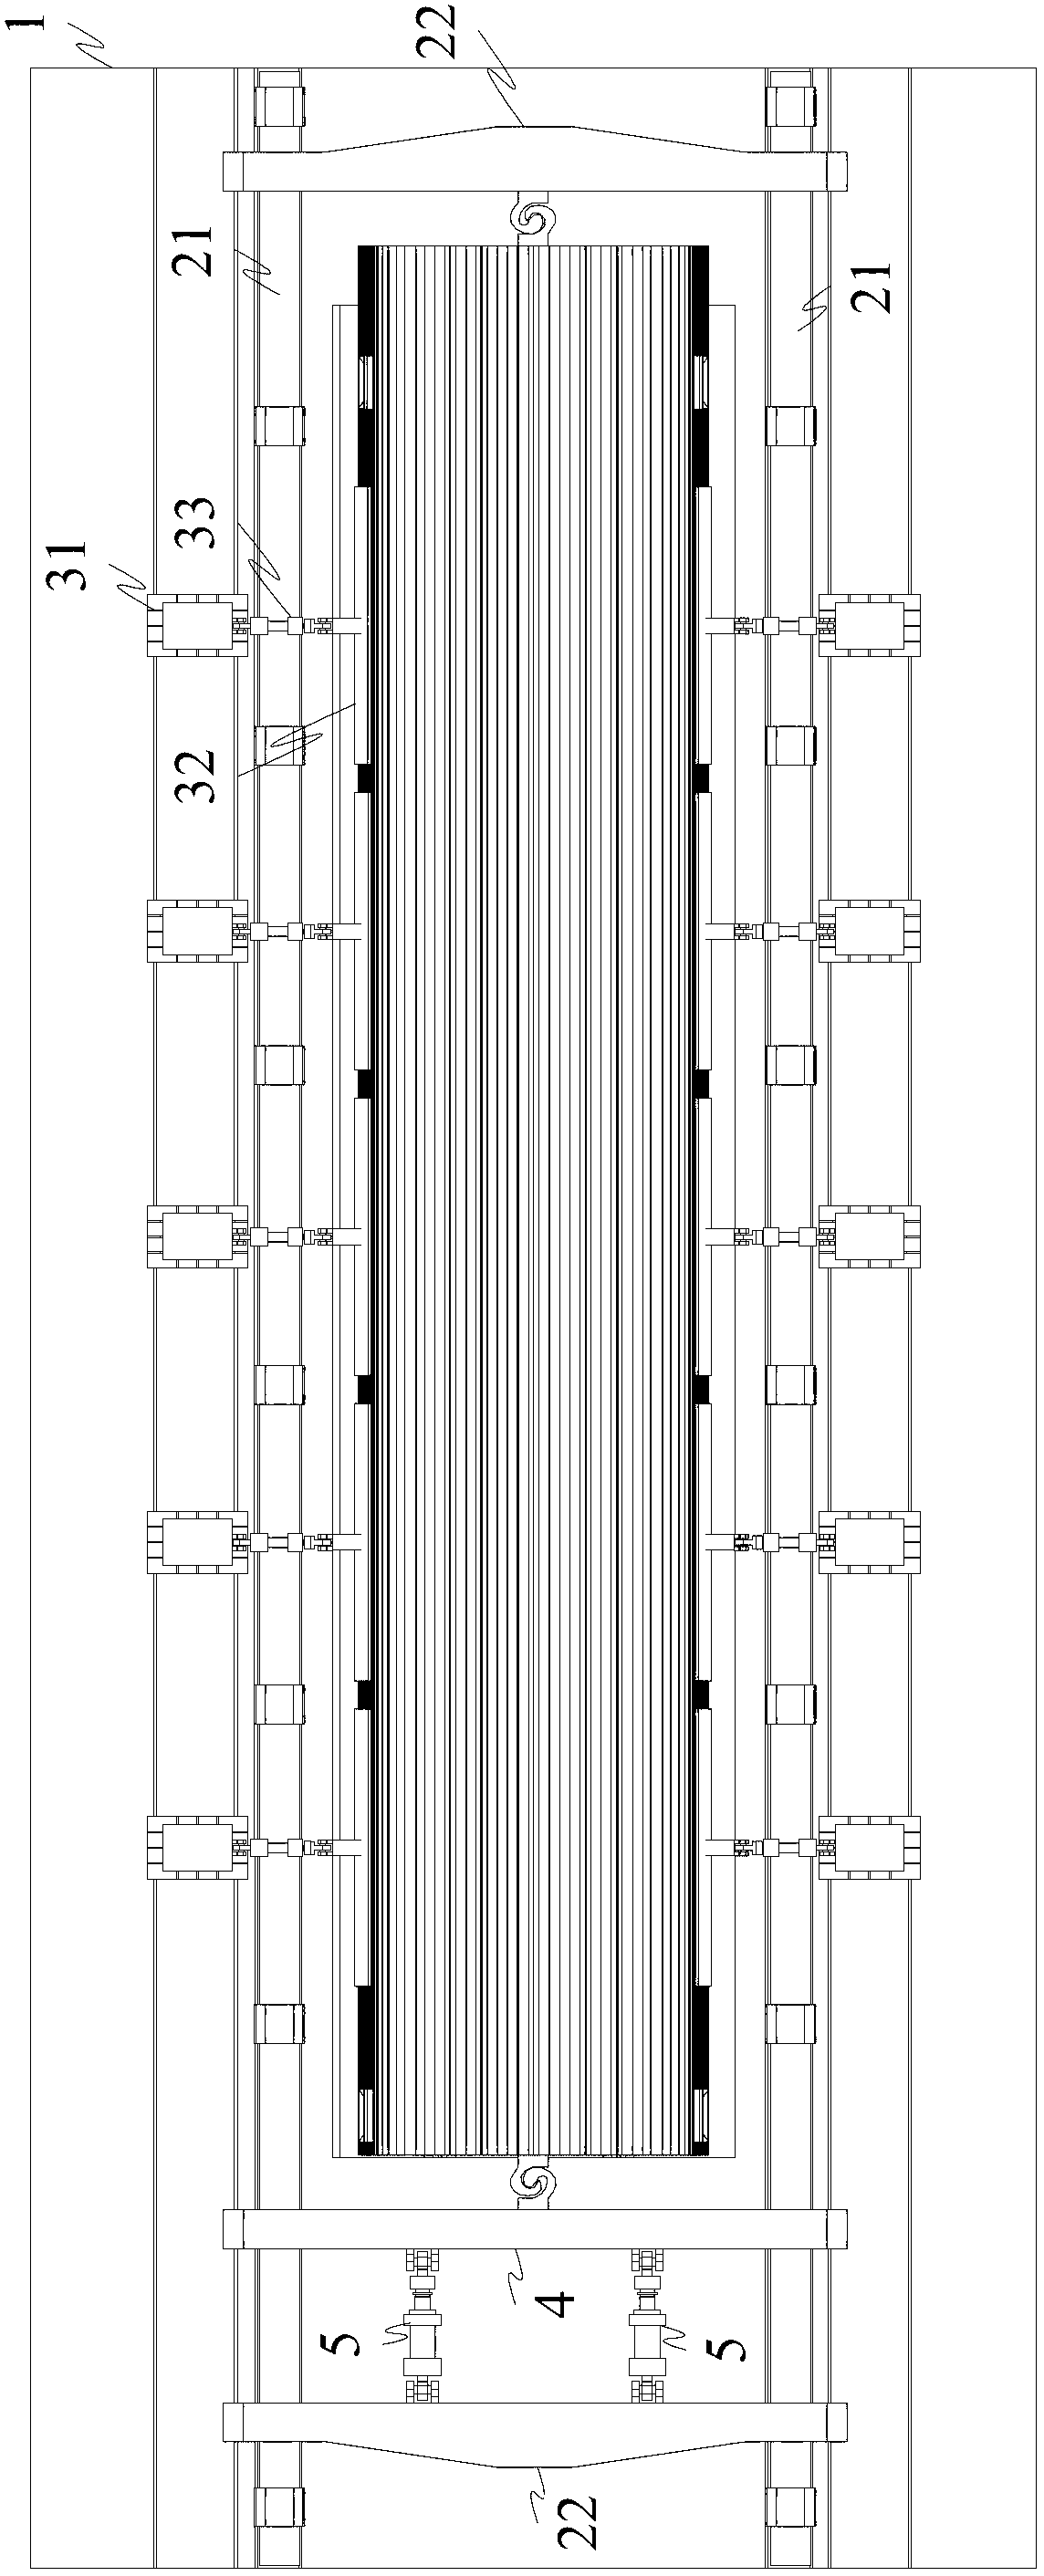 Simulation test device for pneumatic load of vehicle body